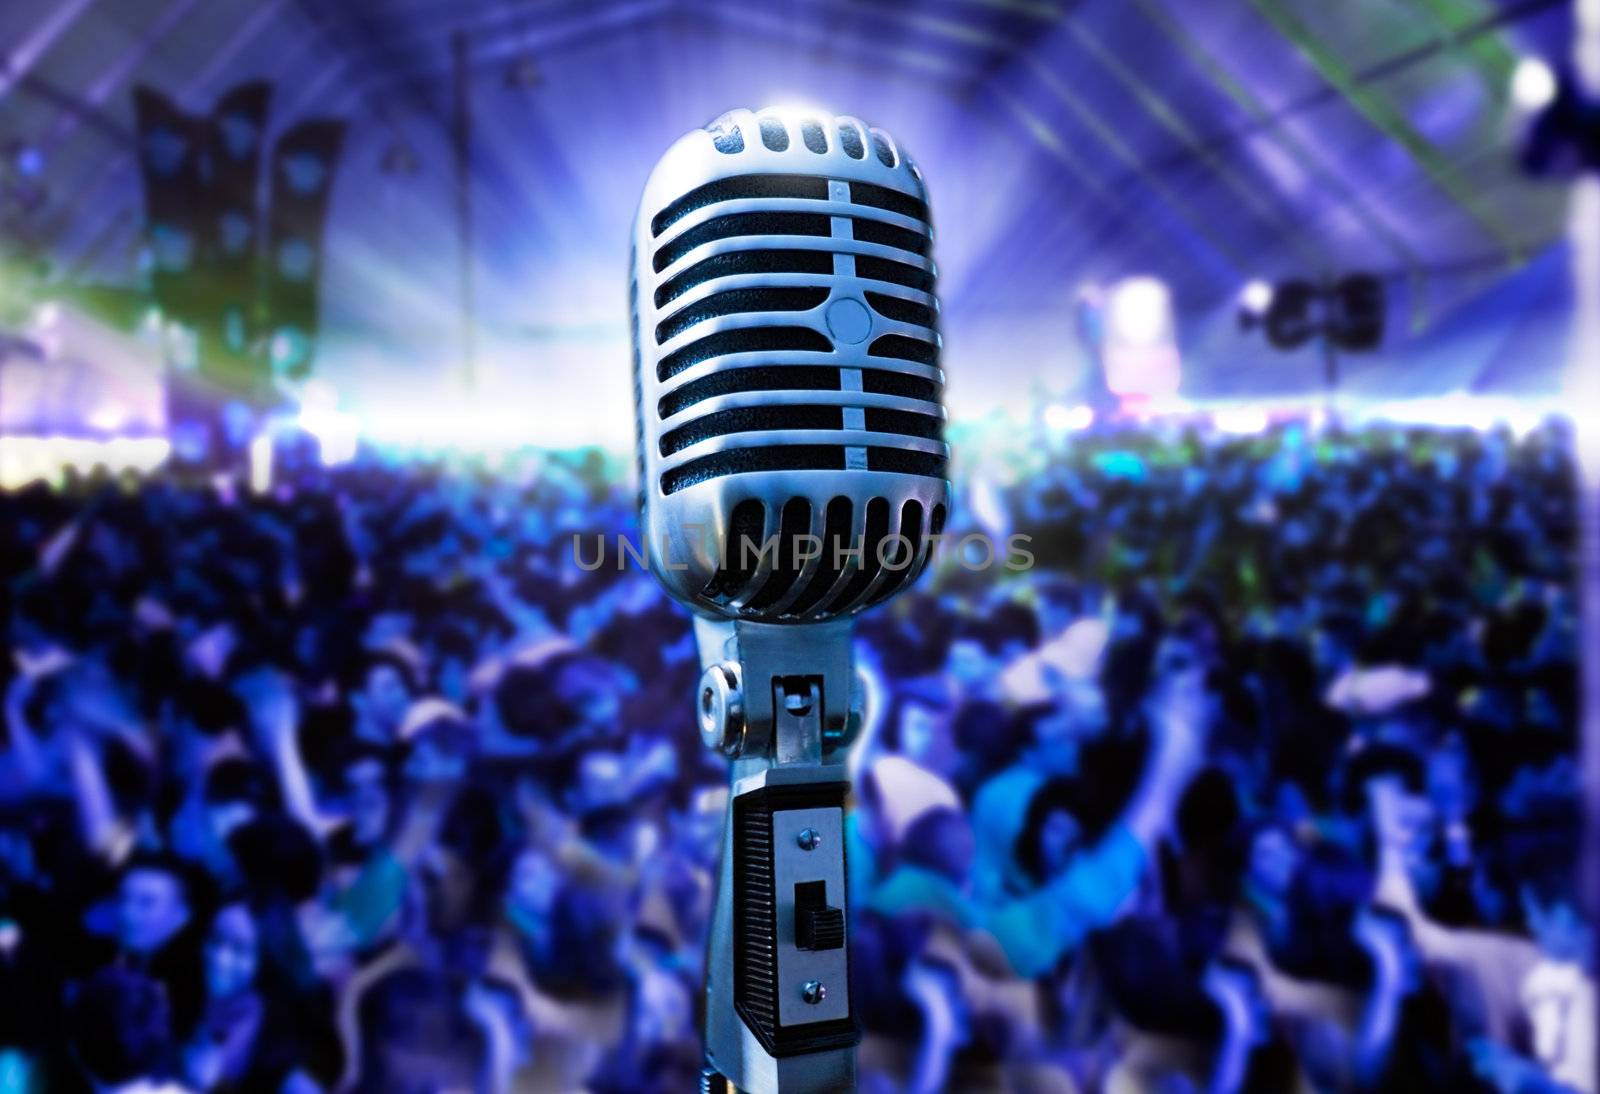 Illustration of live music with vintage microphone and public